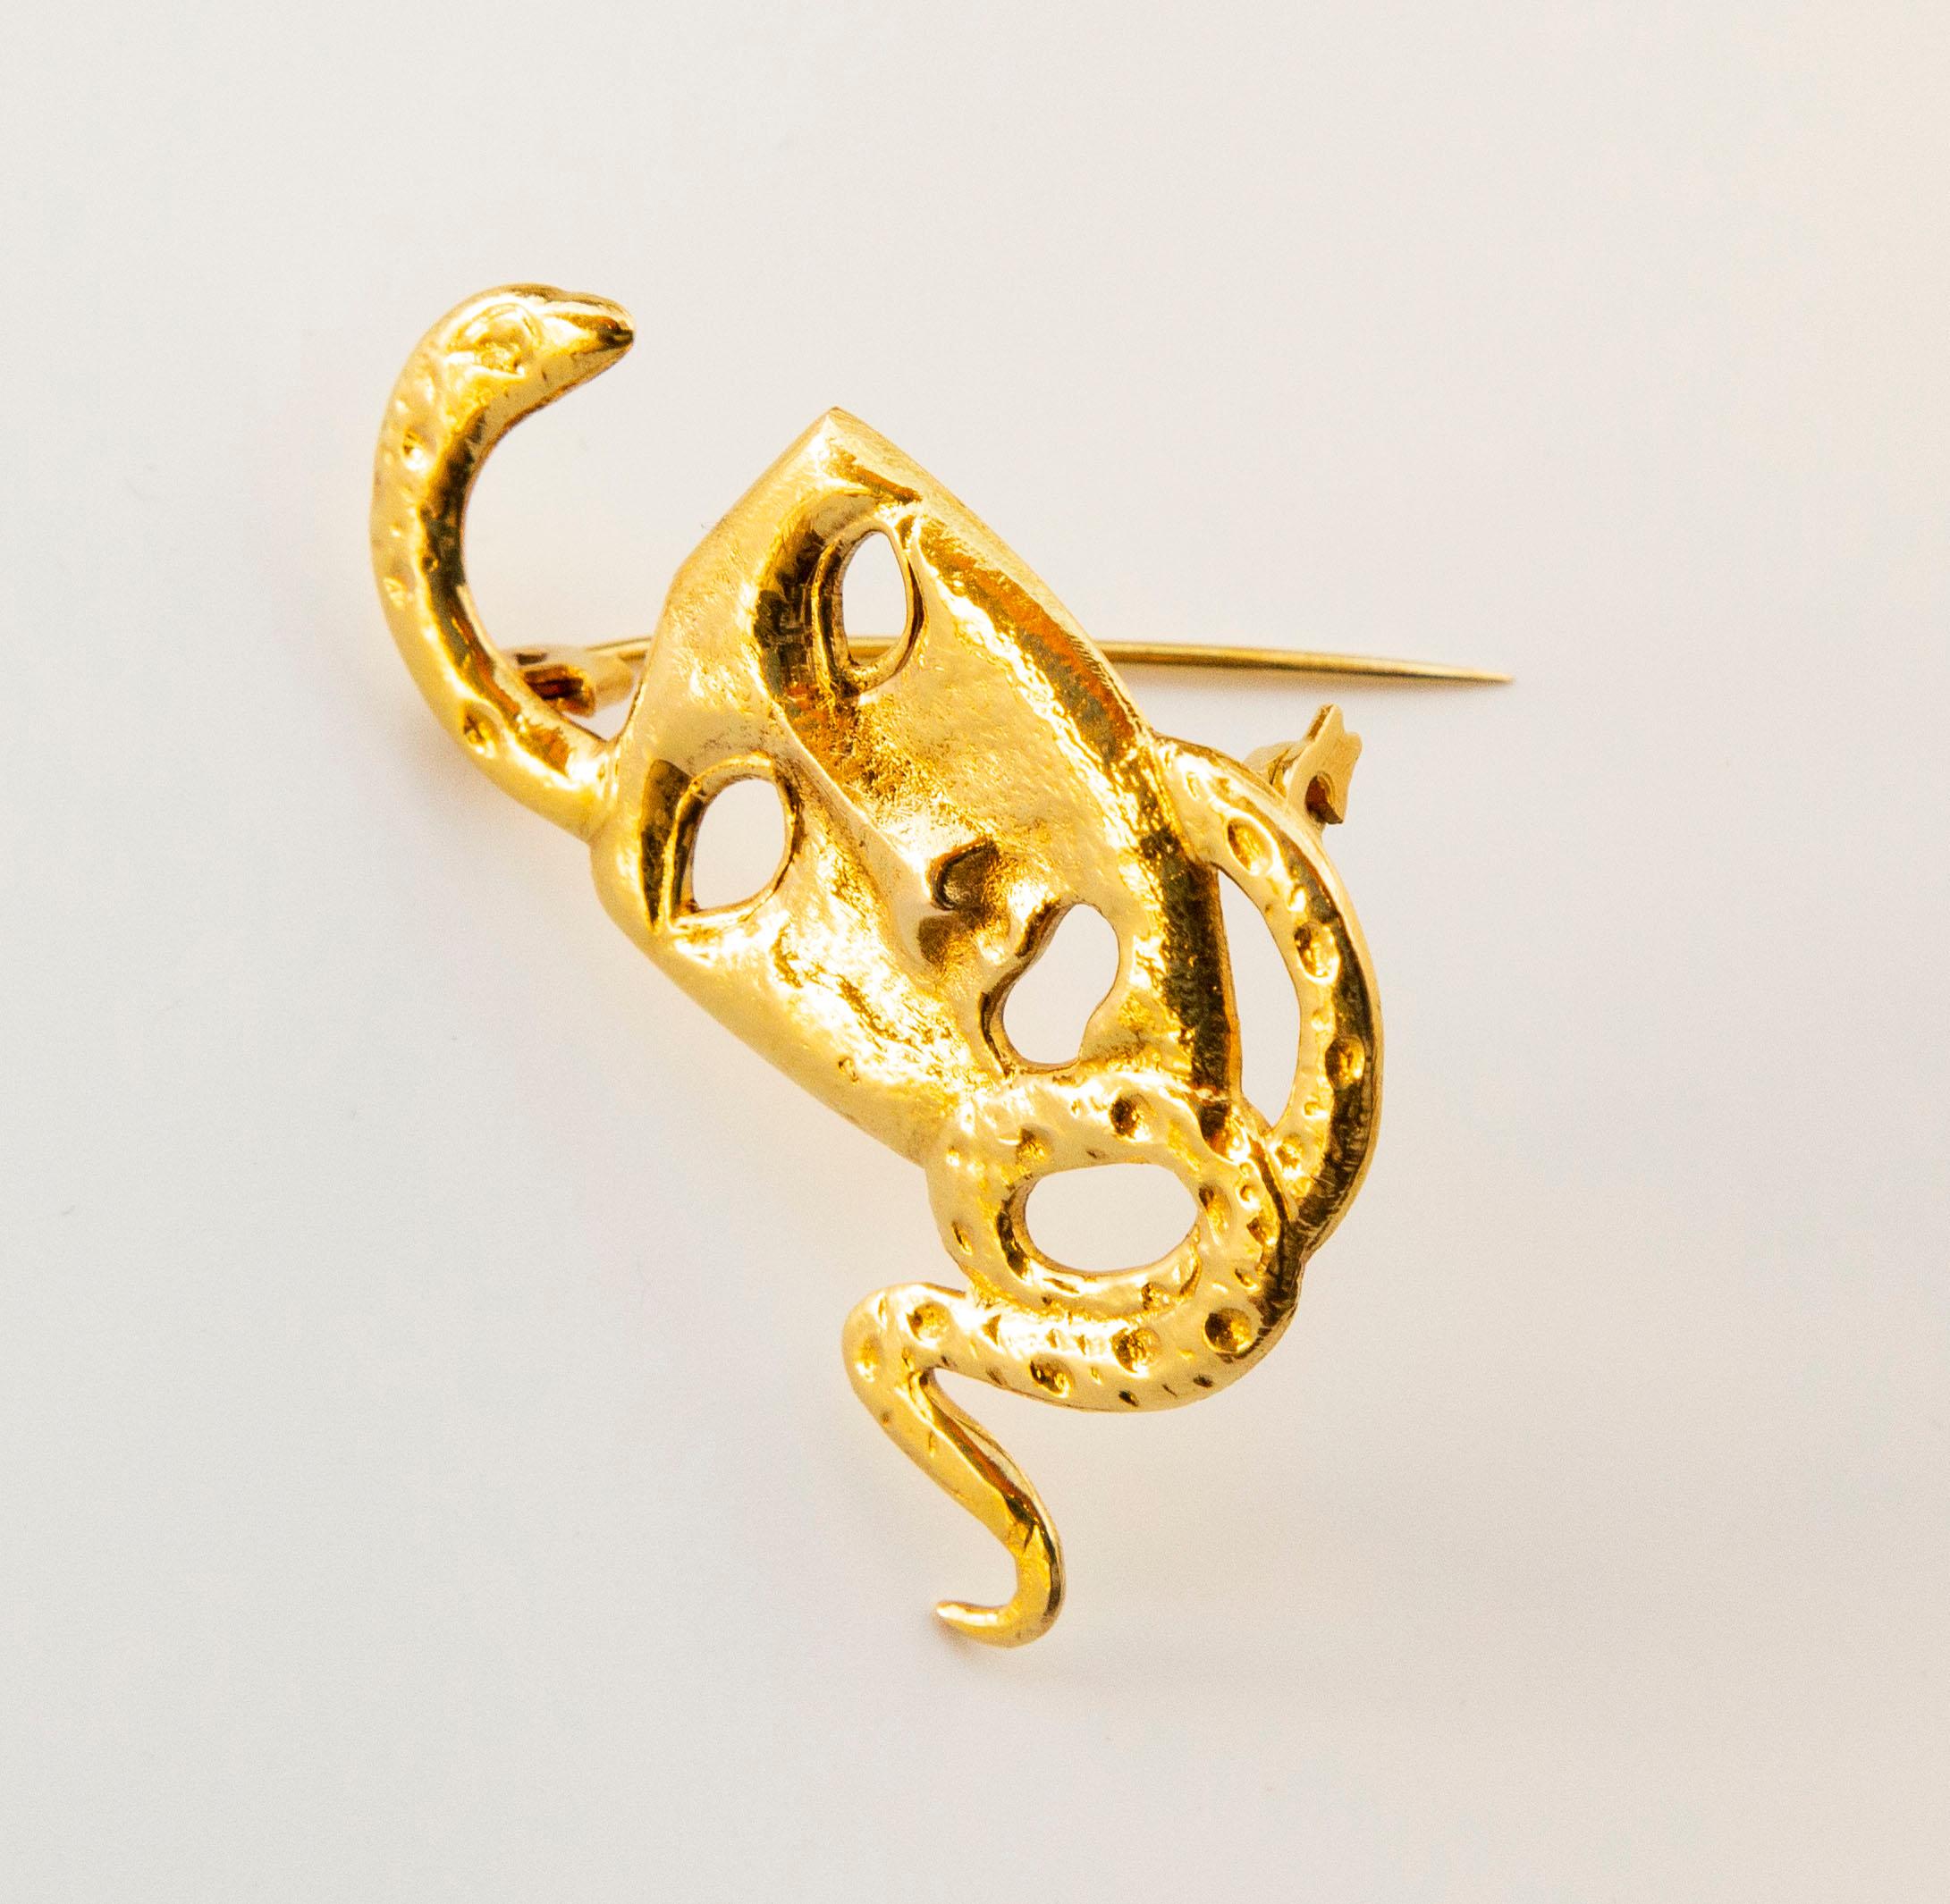 18 Karat Yellow Gold Brooch Designed as an Actor Drama Mask with a Snake In Good Condition For Sale In Arnhem, NL